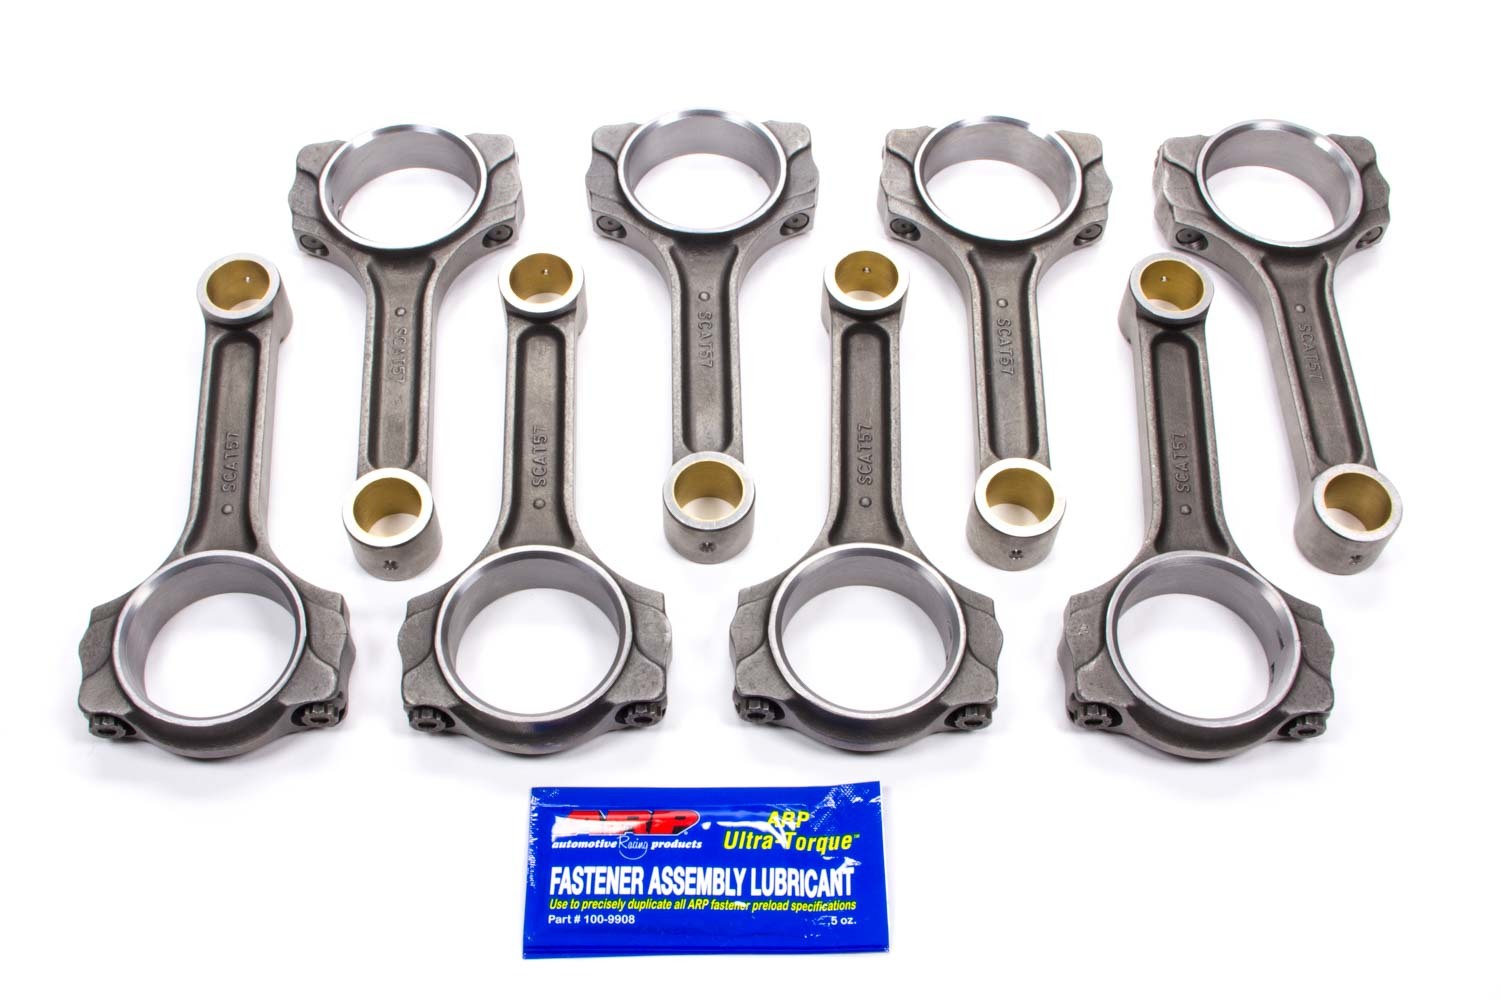 Scat 2-ICR6125-7/16 - Connecting Rod, Pro Comp, I Beam, 6.125 in Long, Bushed, 7/16 in Cap Screws, ARP8740, Forged Steel, Small Block Chevy, Set of 8